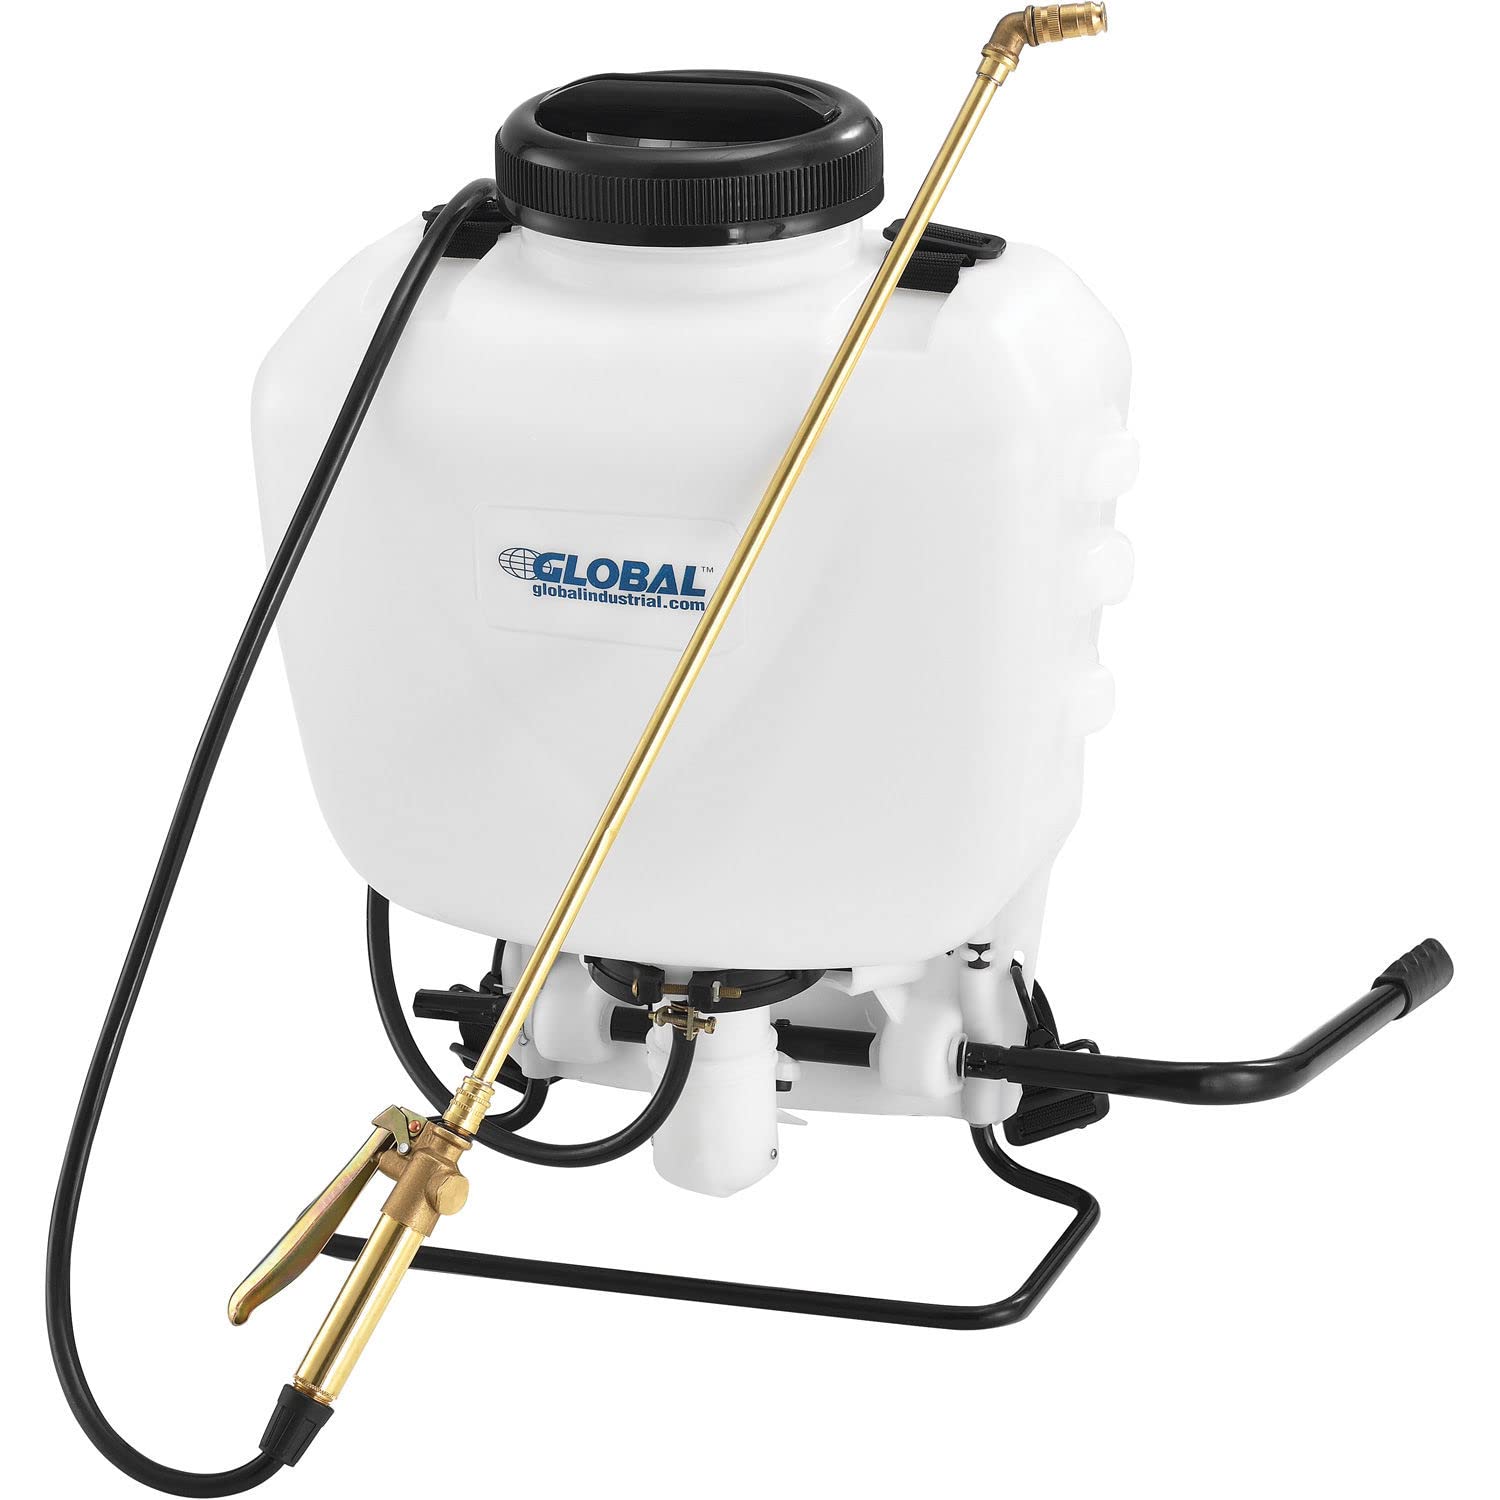 Global Industrial 4 Gallon Commercial Duty Manual Backpack Pump Sprayer W/Brass Wand & Nozzle